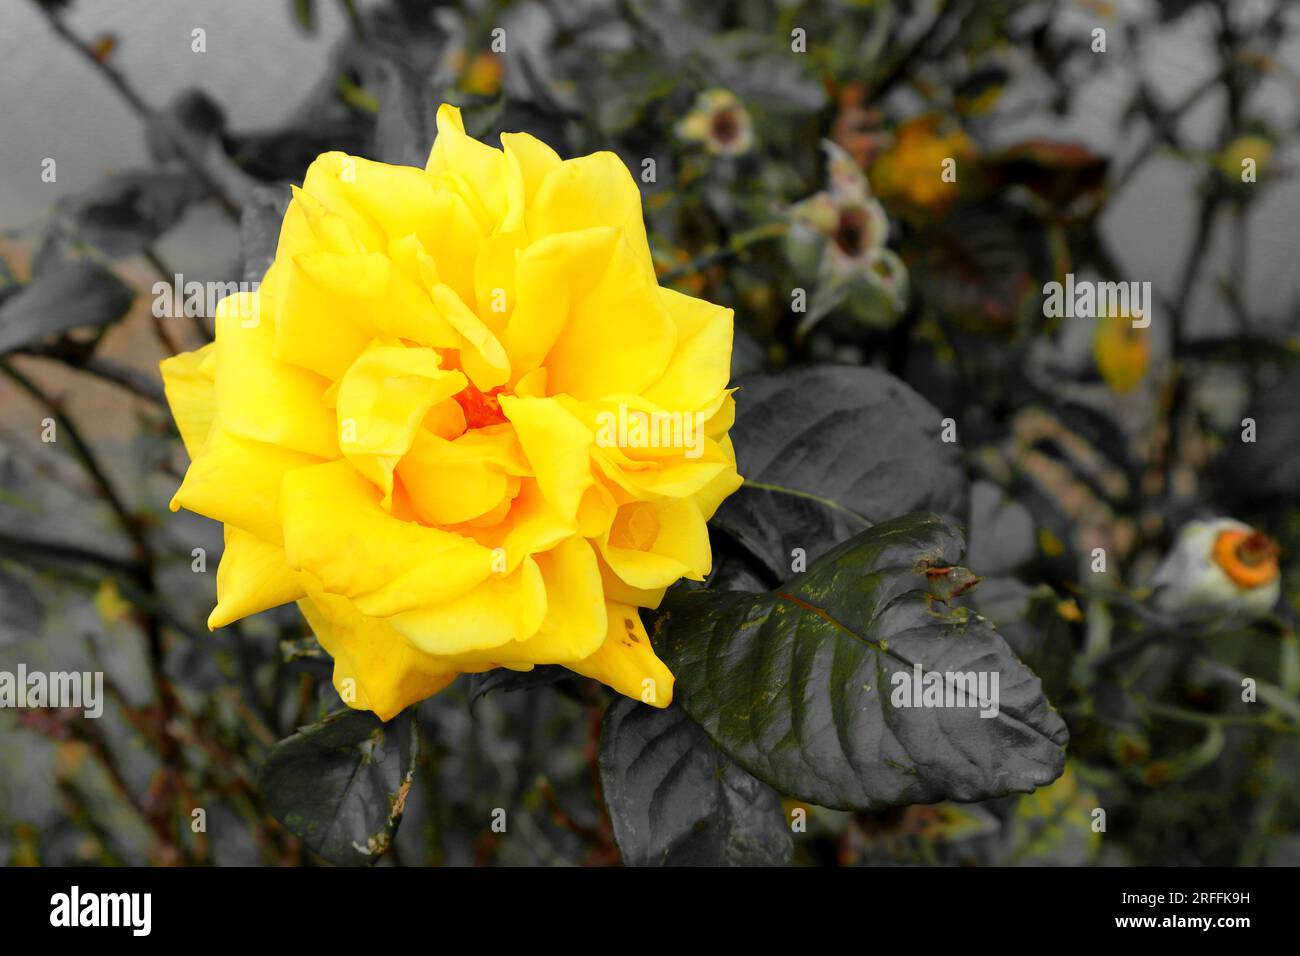 Vibrant yellow rose set against leaves and foliage. Background colours desaturated apart from orange and yellow shades. Stock Photo